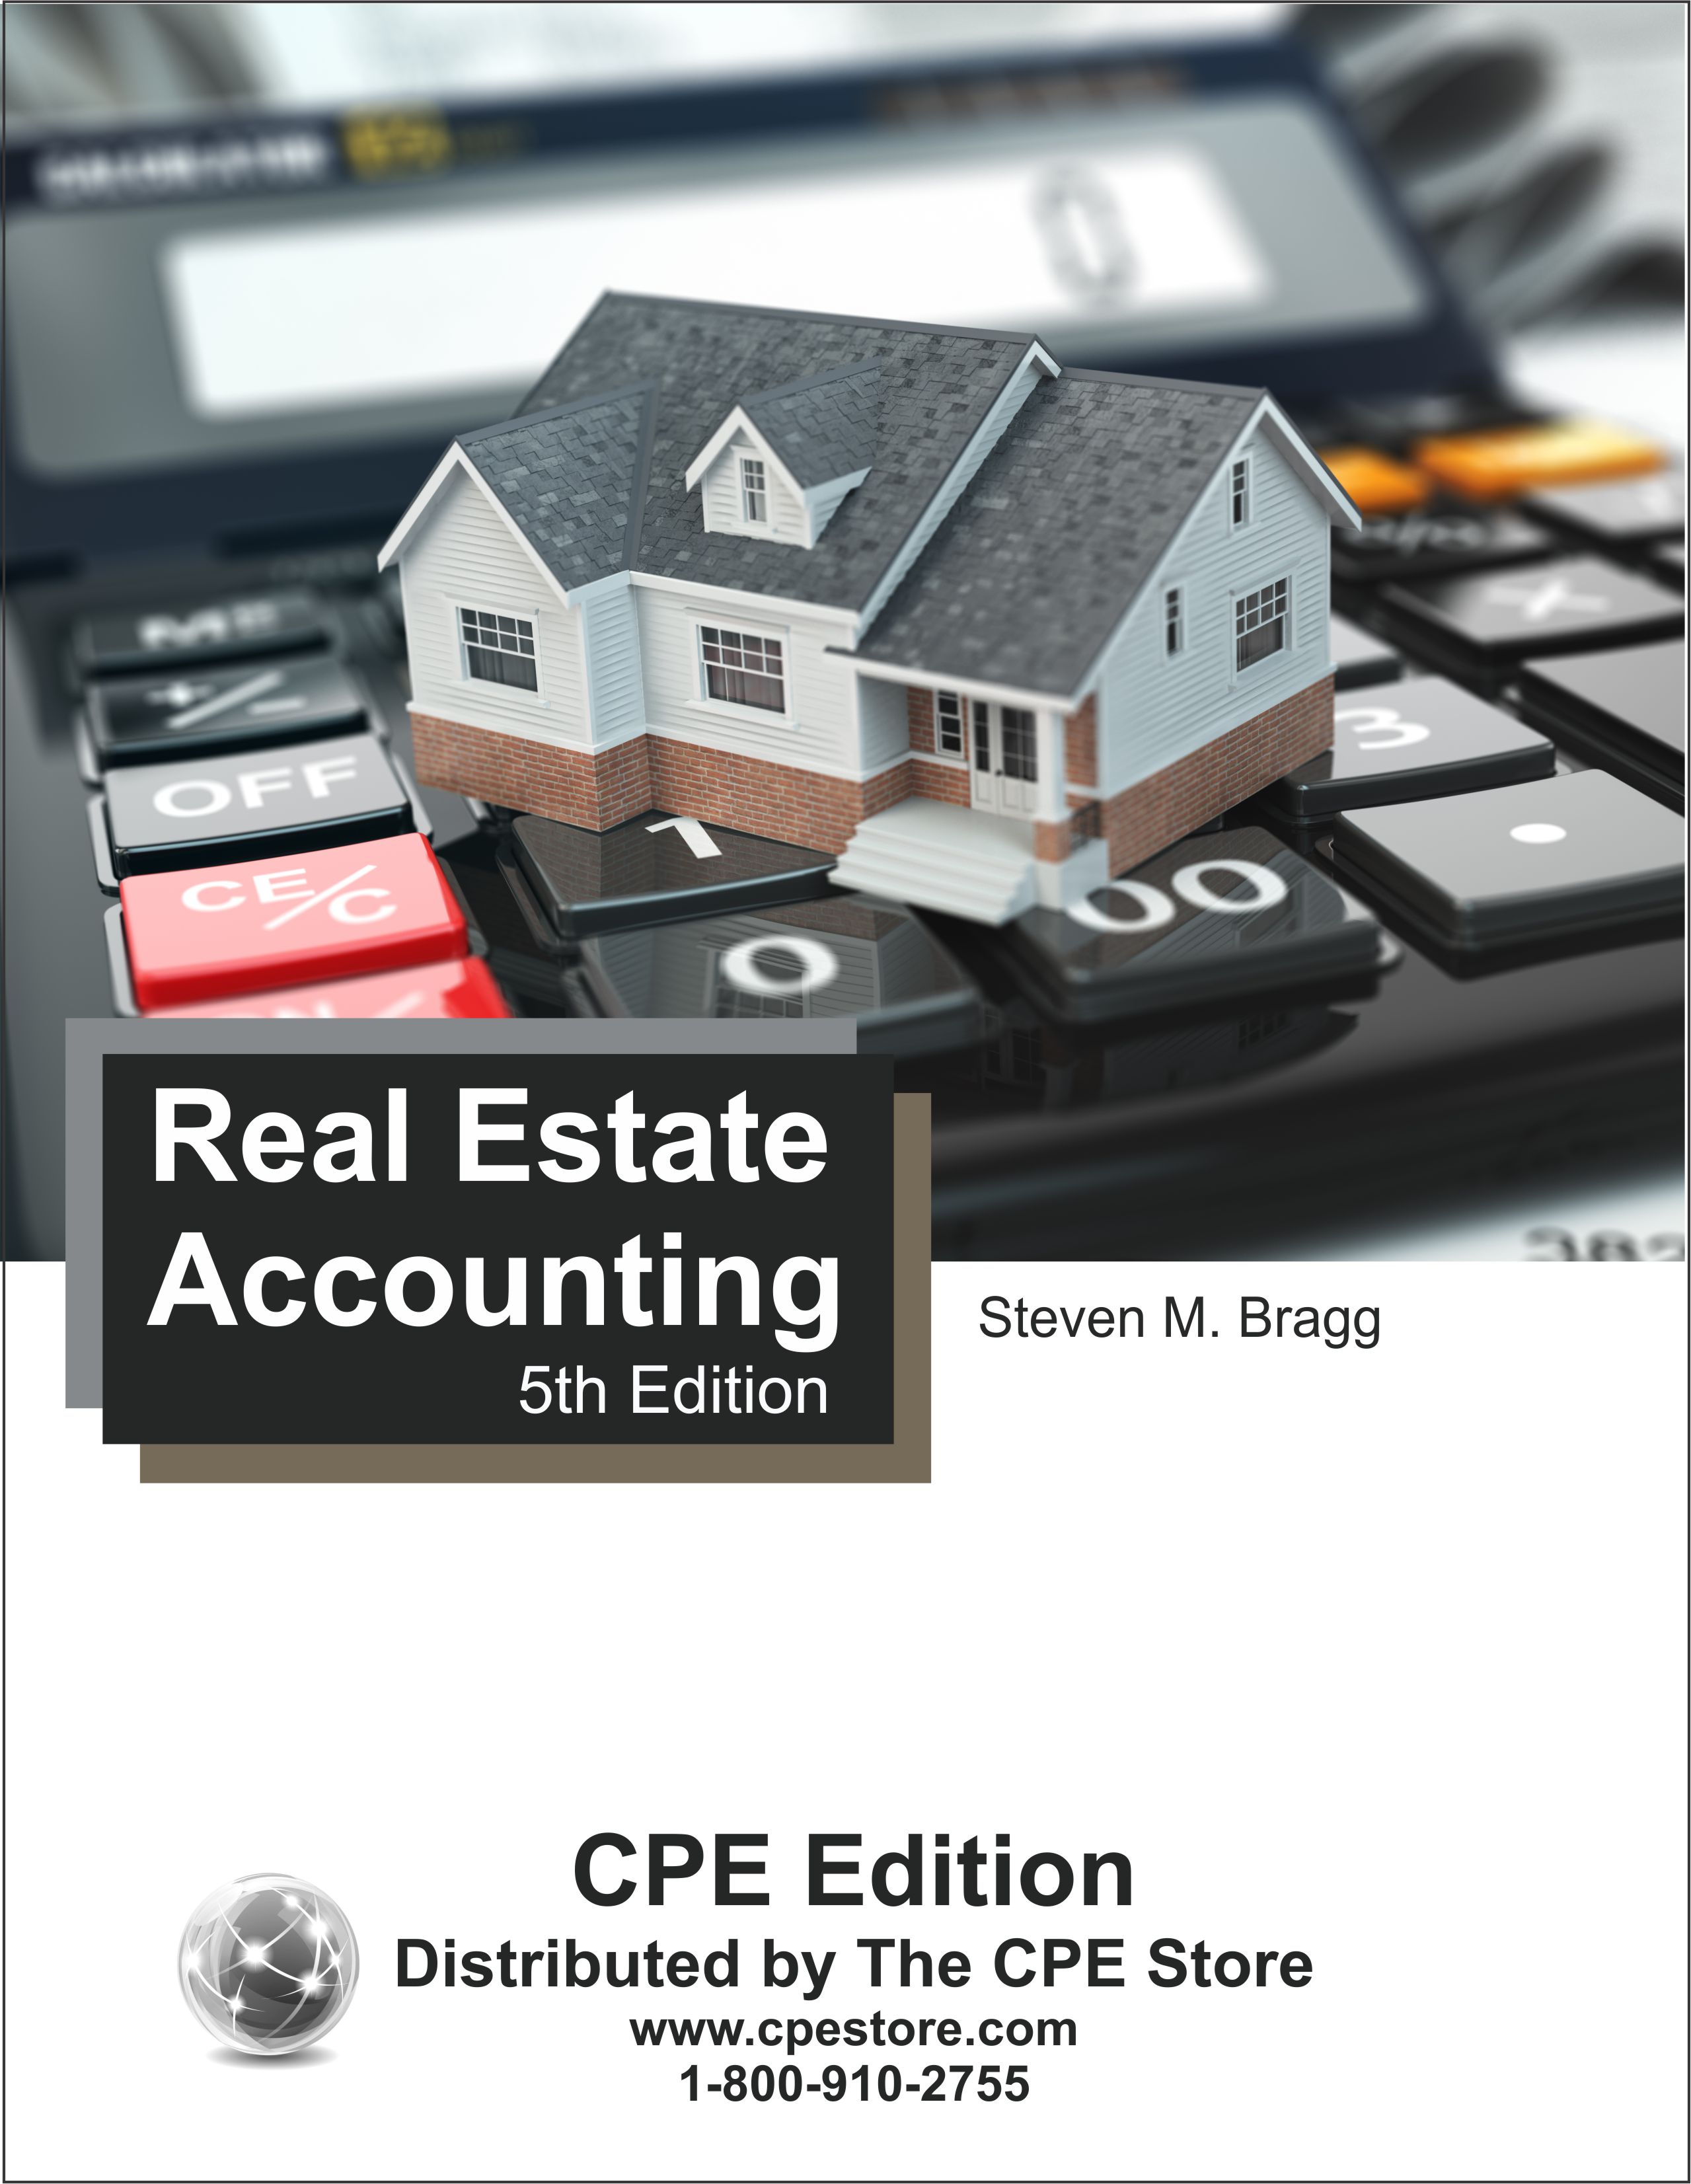 Real Estate Accounting